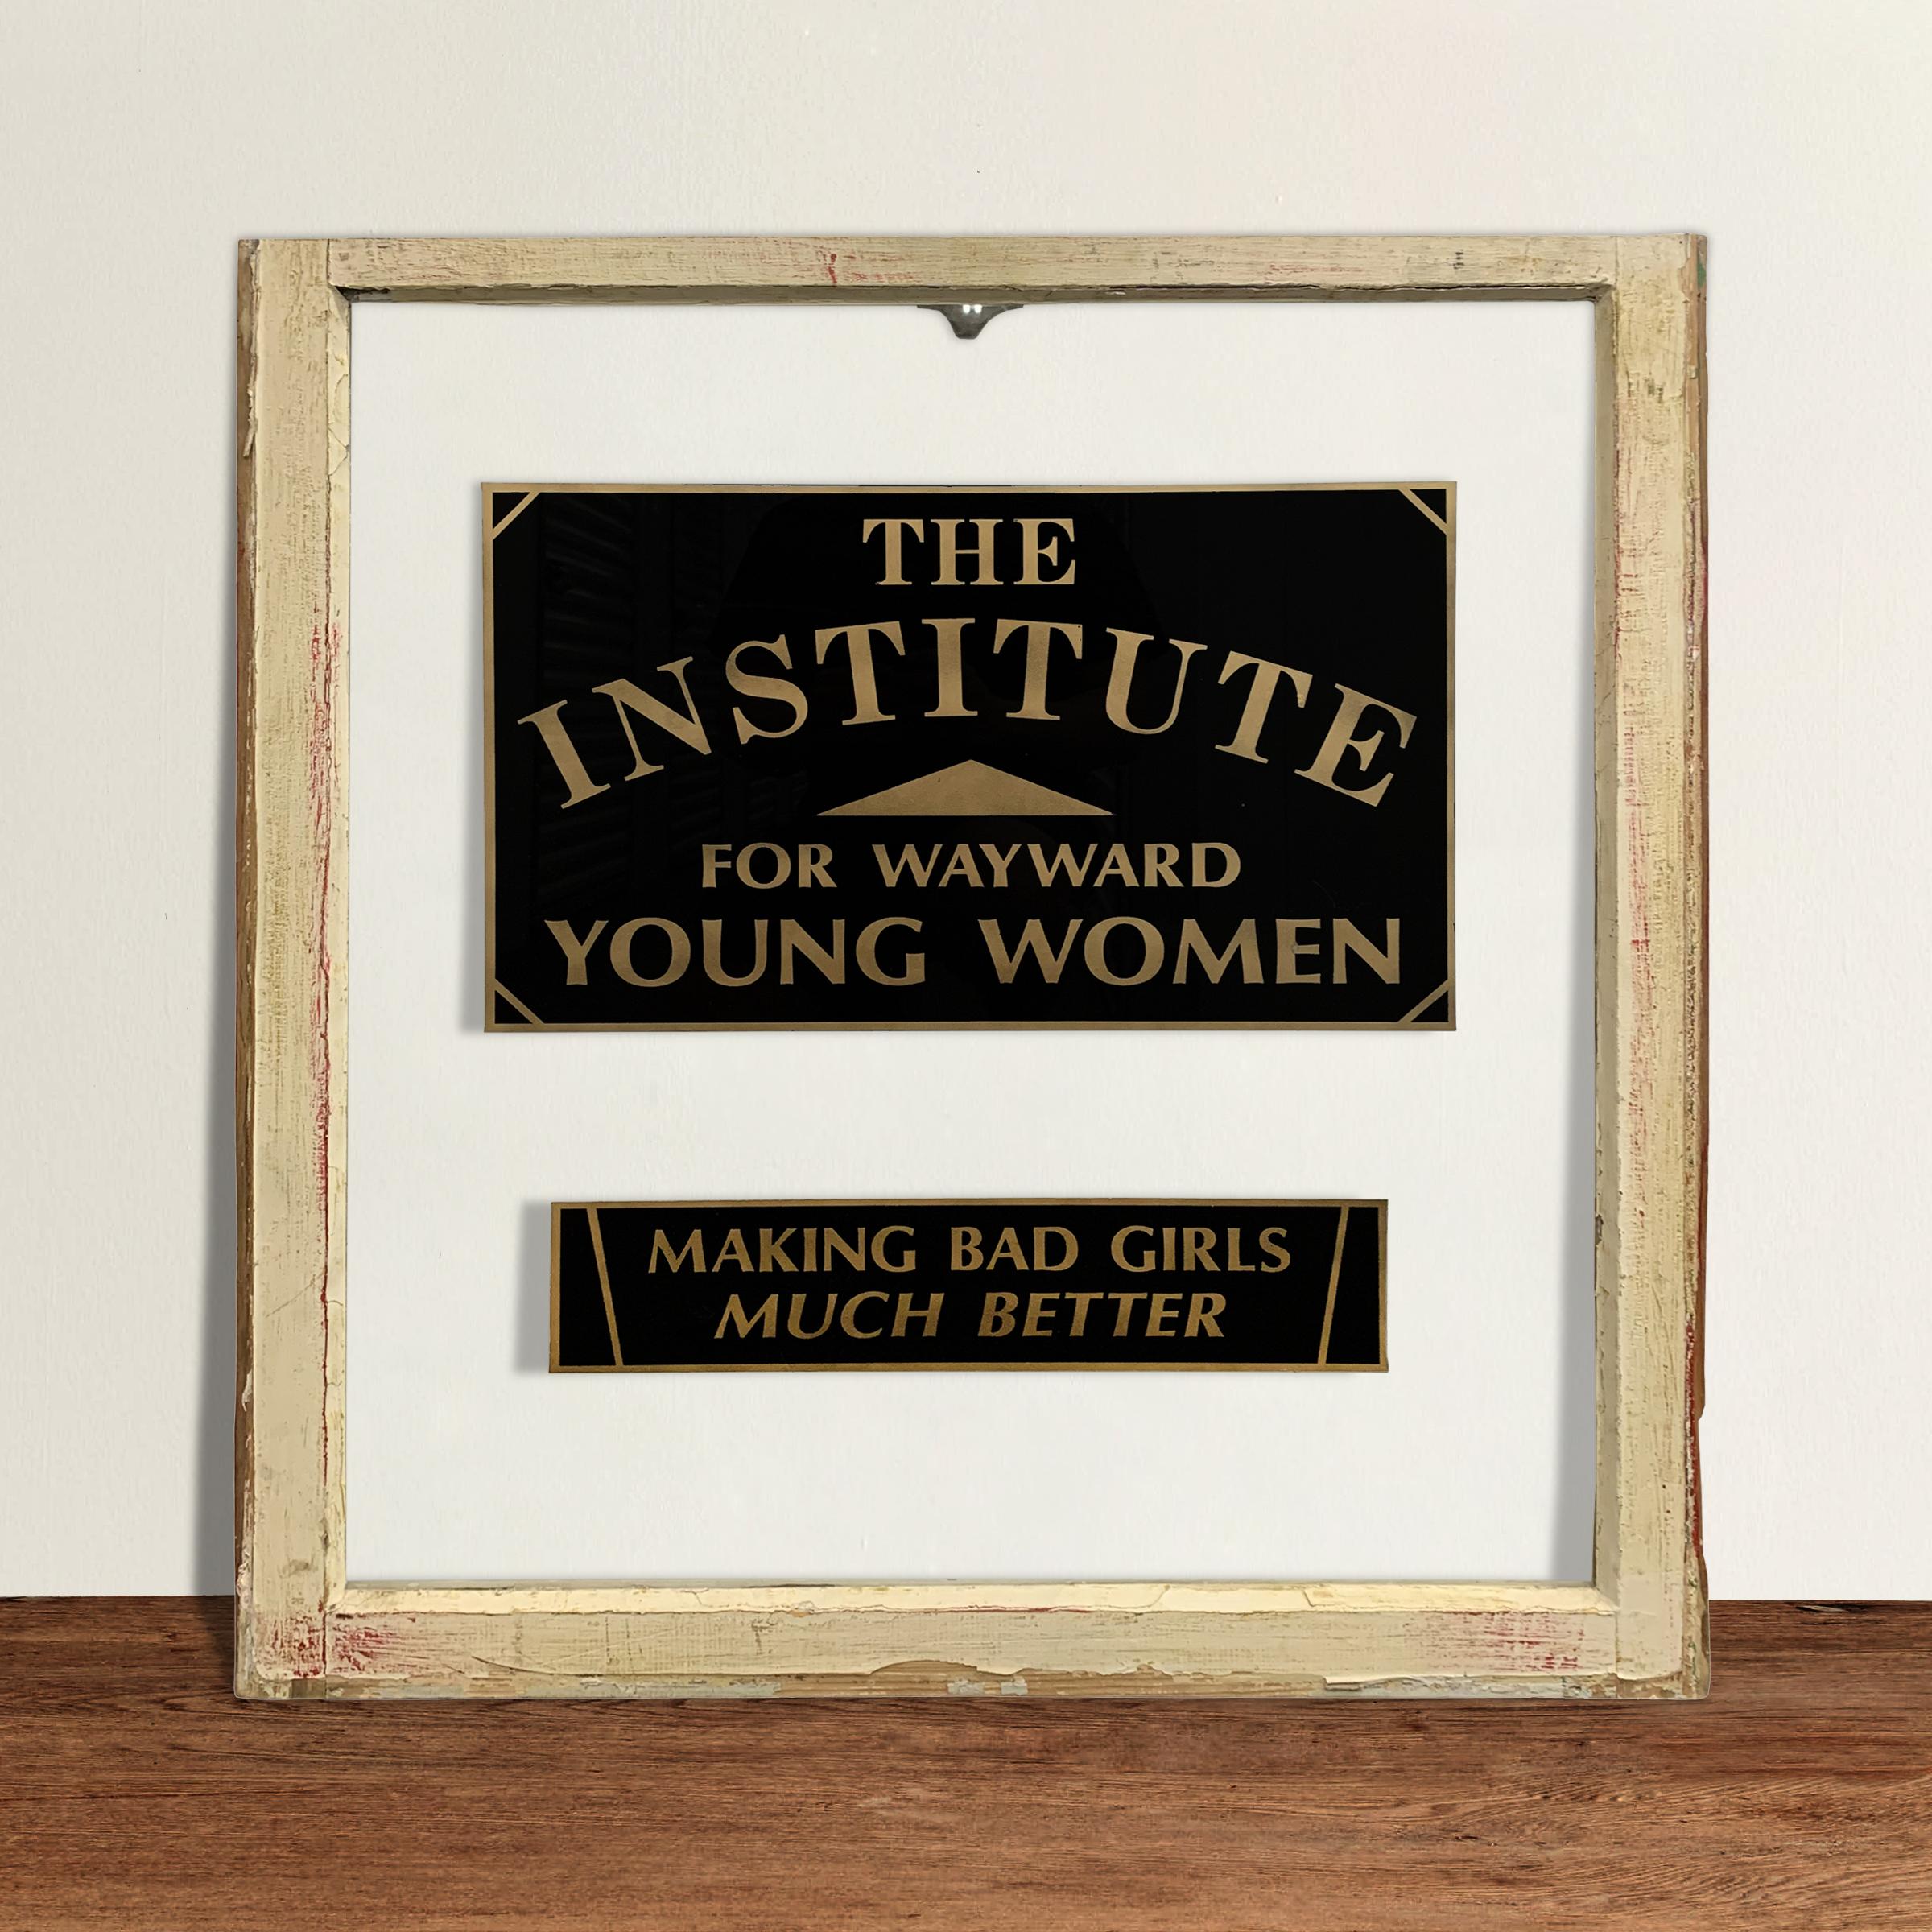 A cheeky mid-20th century American window from the office of The Institute for Wayward Women. The signage is hand painted and applied on the reverse side of the glass in gold leaf letters. 